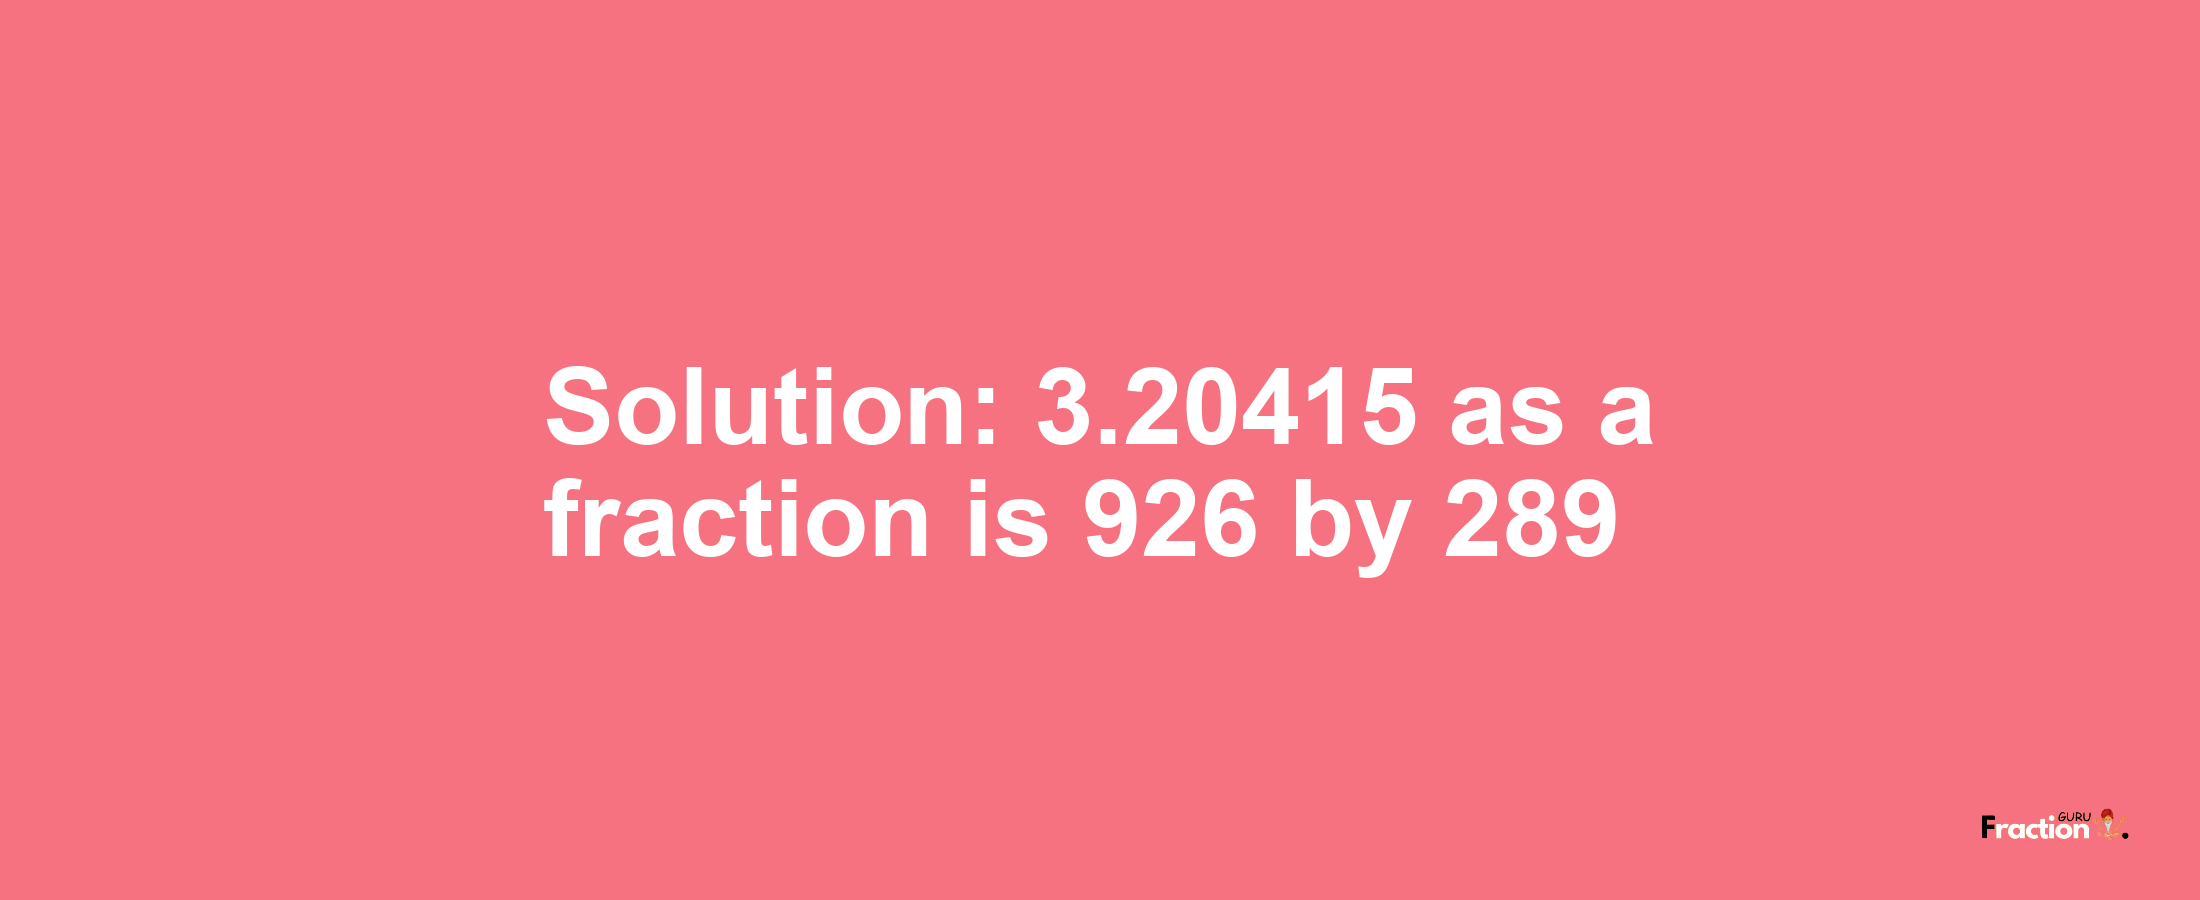 Solution:3.20415 as a fraction is 926/289